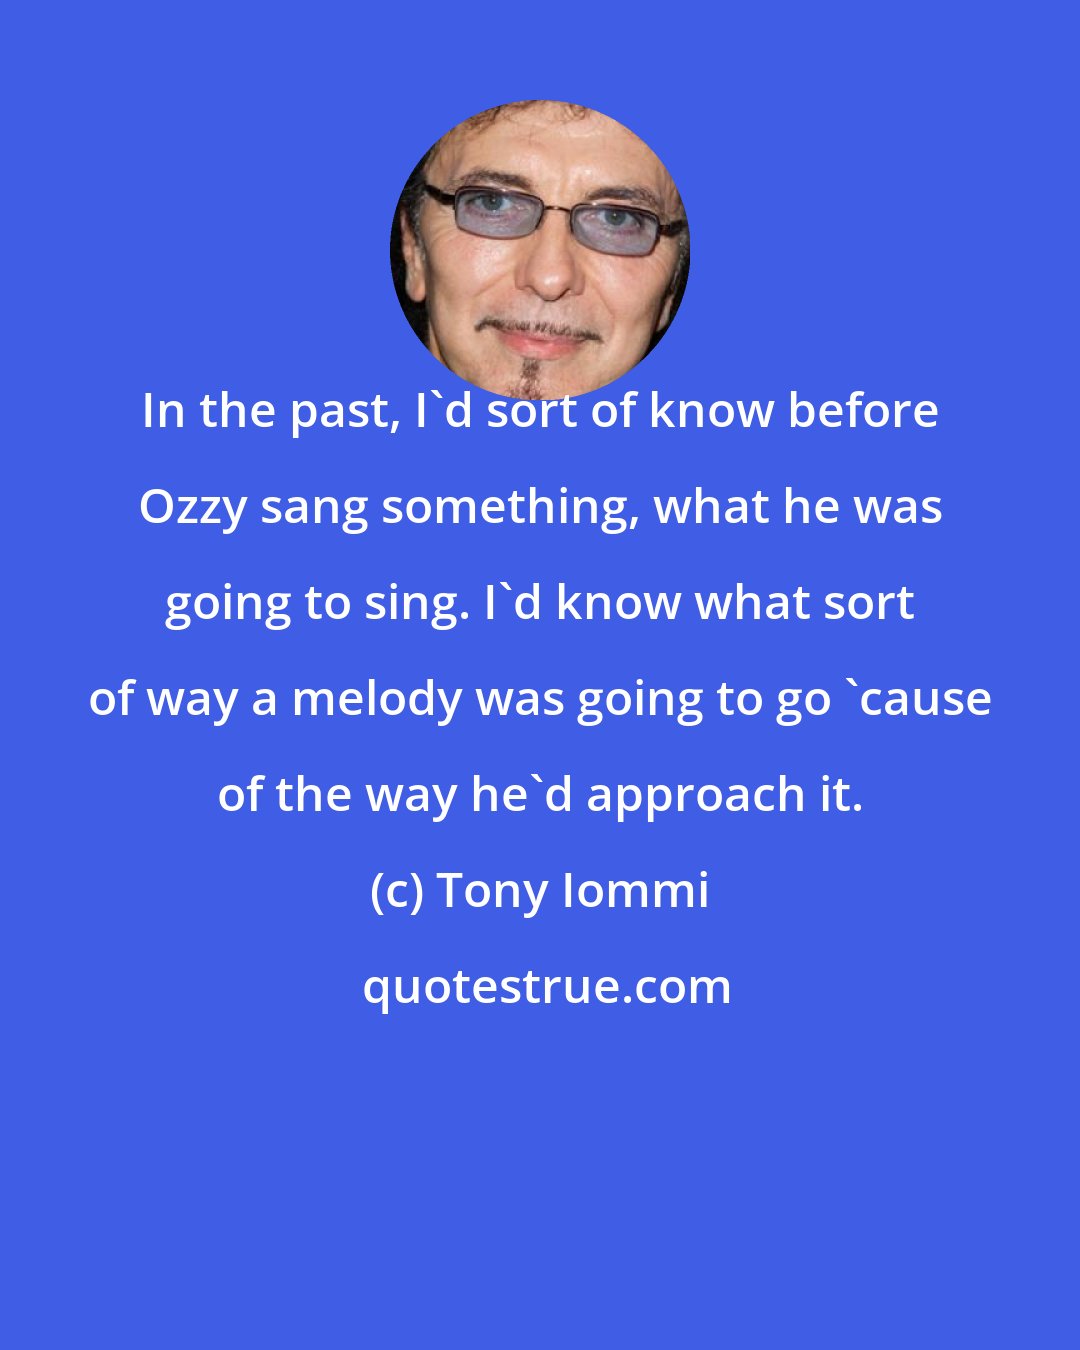 Tony Iommi: In the past, I'd sort of know before Ozzy sang something, what he was going to sing. I'd know what sort of way a melody was going to go 'cause of the way he'd approach it.